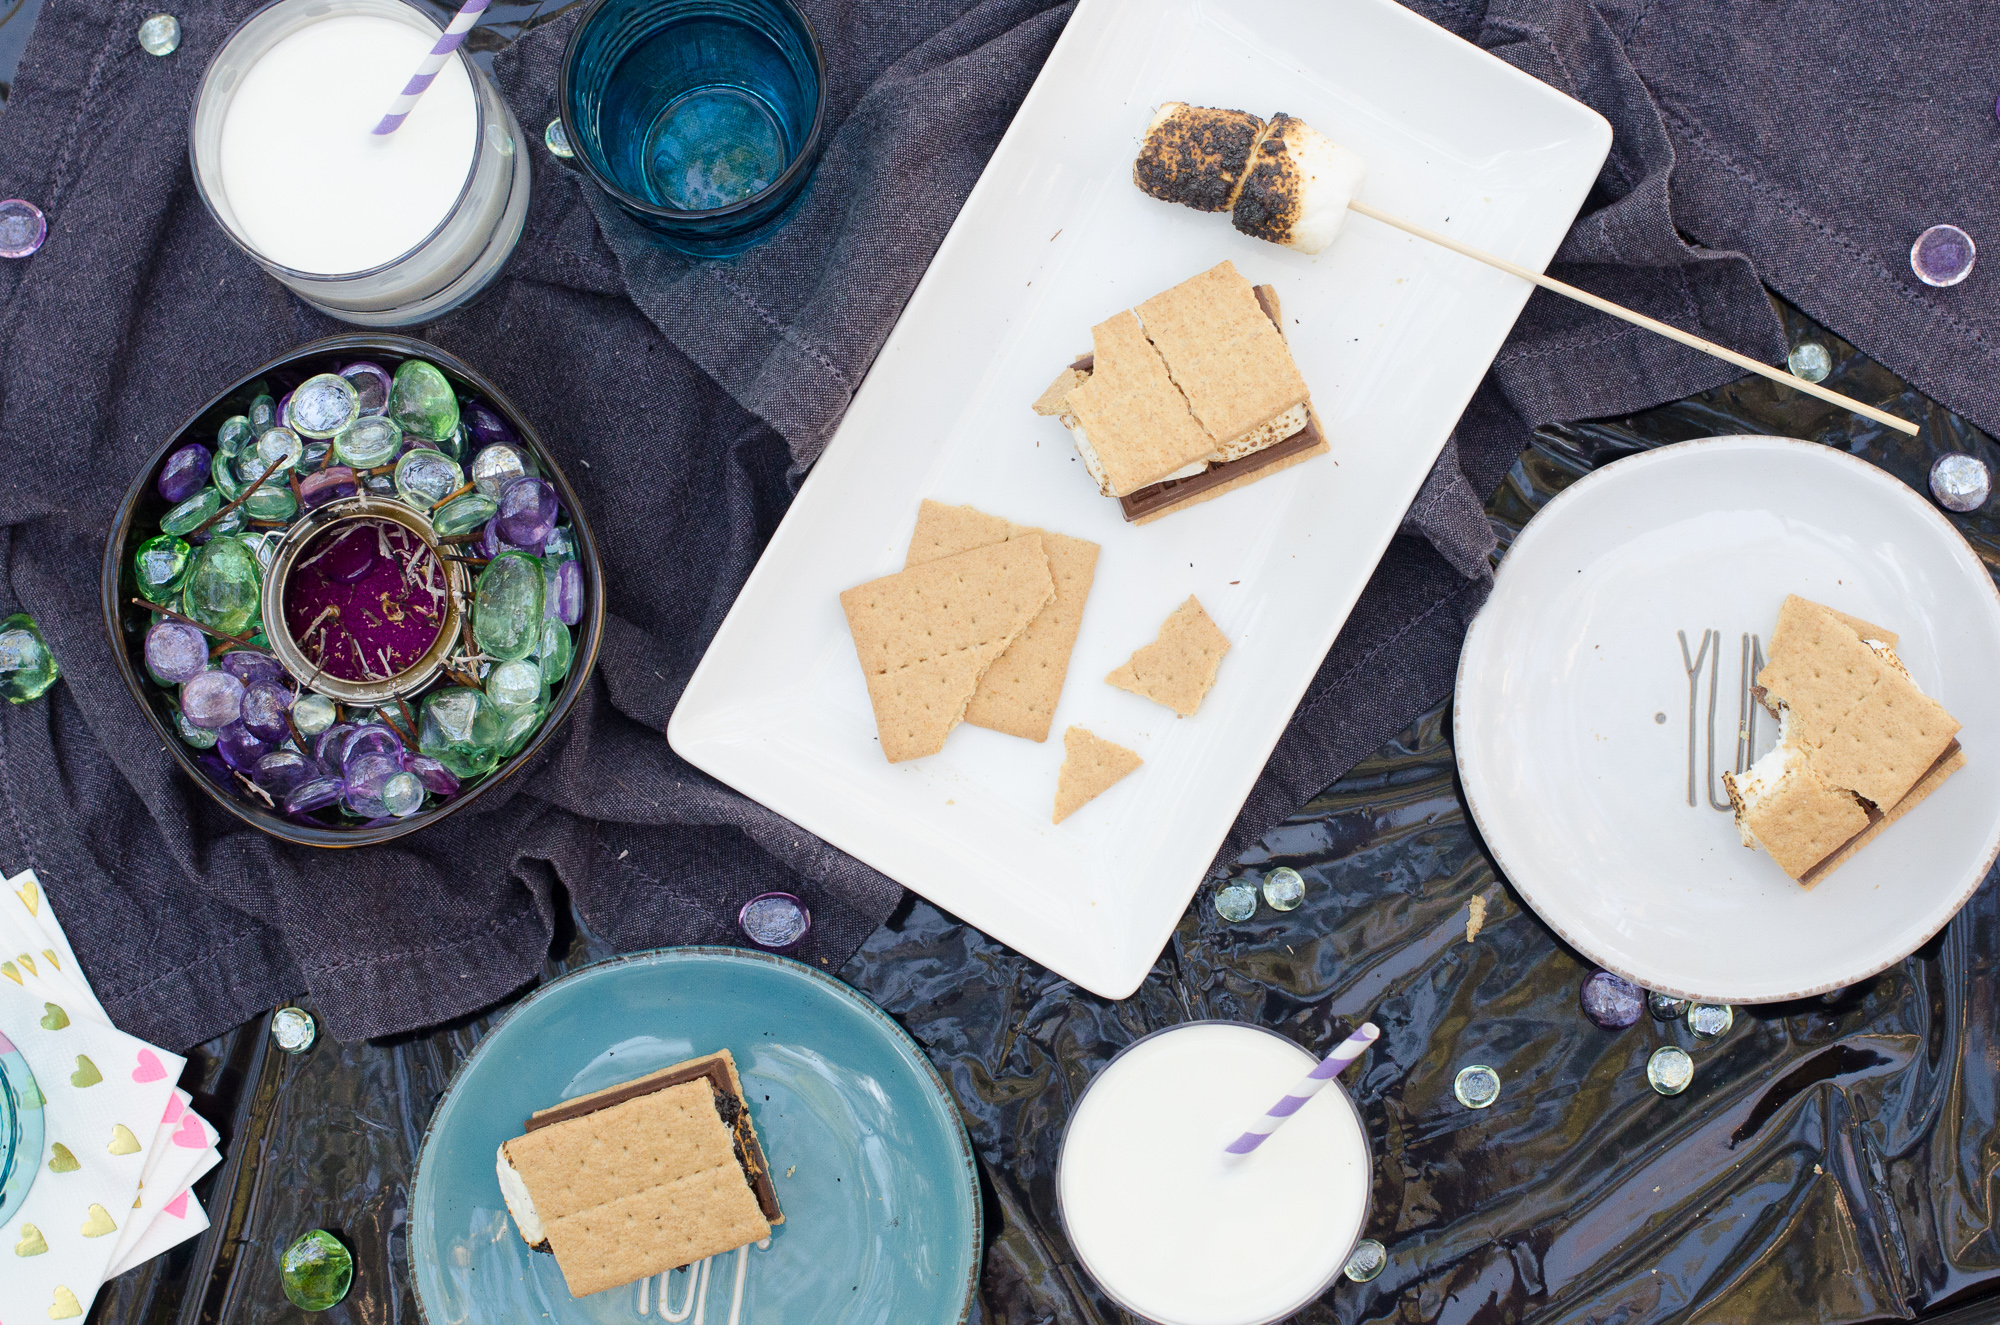 Tabletop S'mores from ChefSarahElizabeth.com